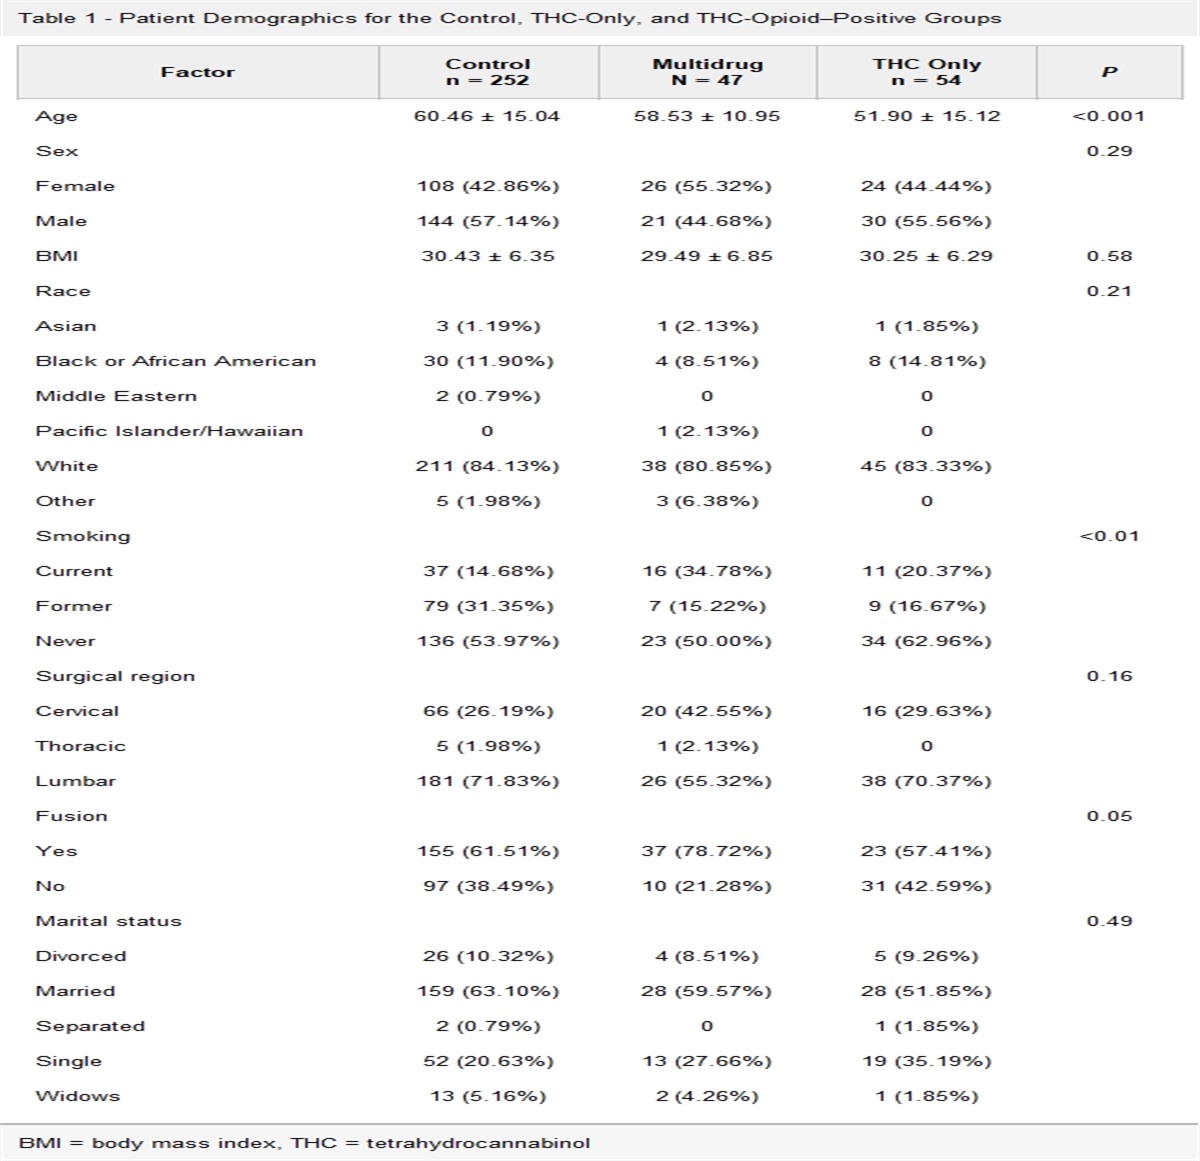 The Effect of Marijuana on Postoperative Spine Patients' Emergency Department Visits, Readmission Rates, and Opioid Consumption